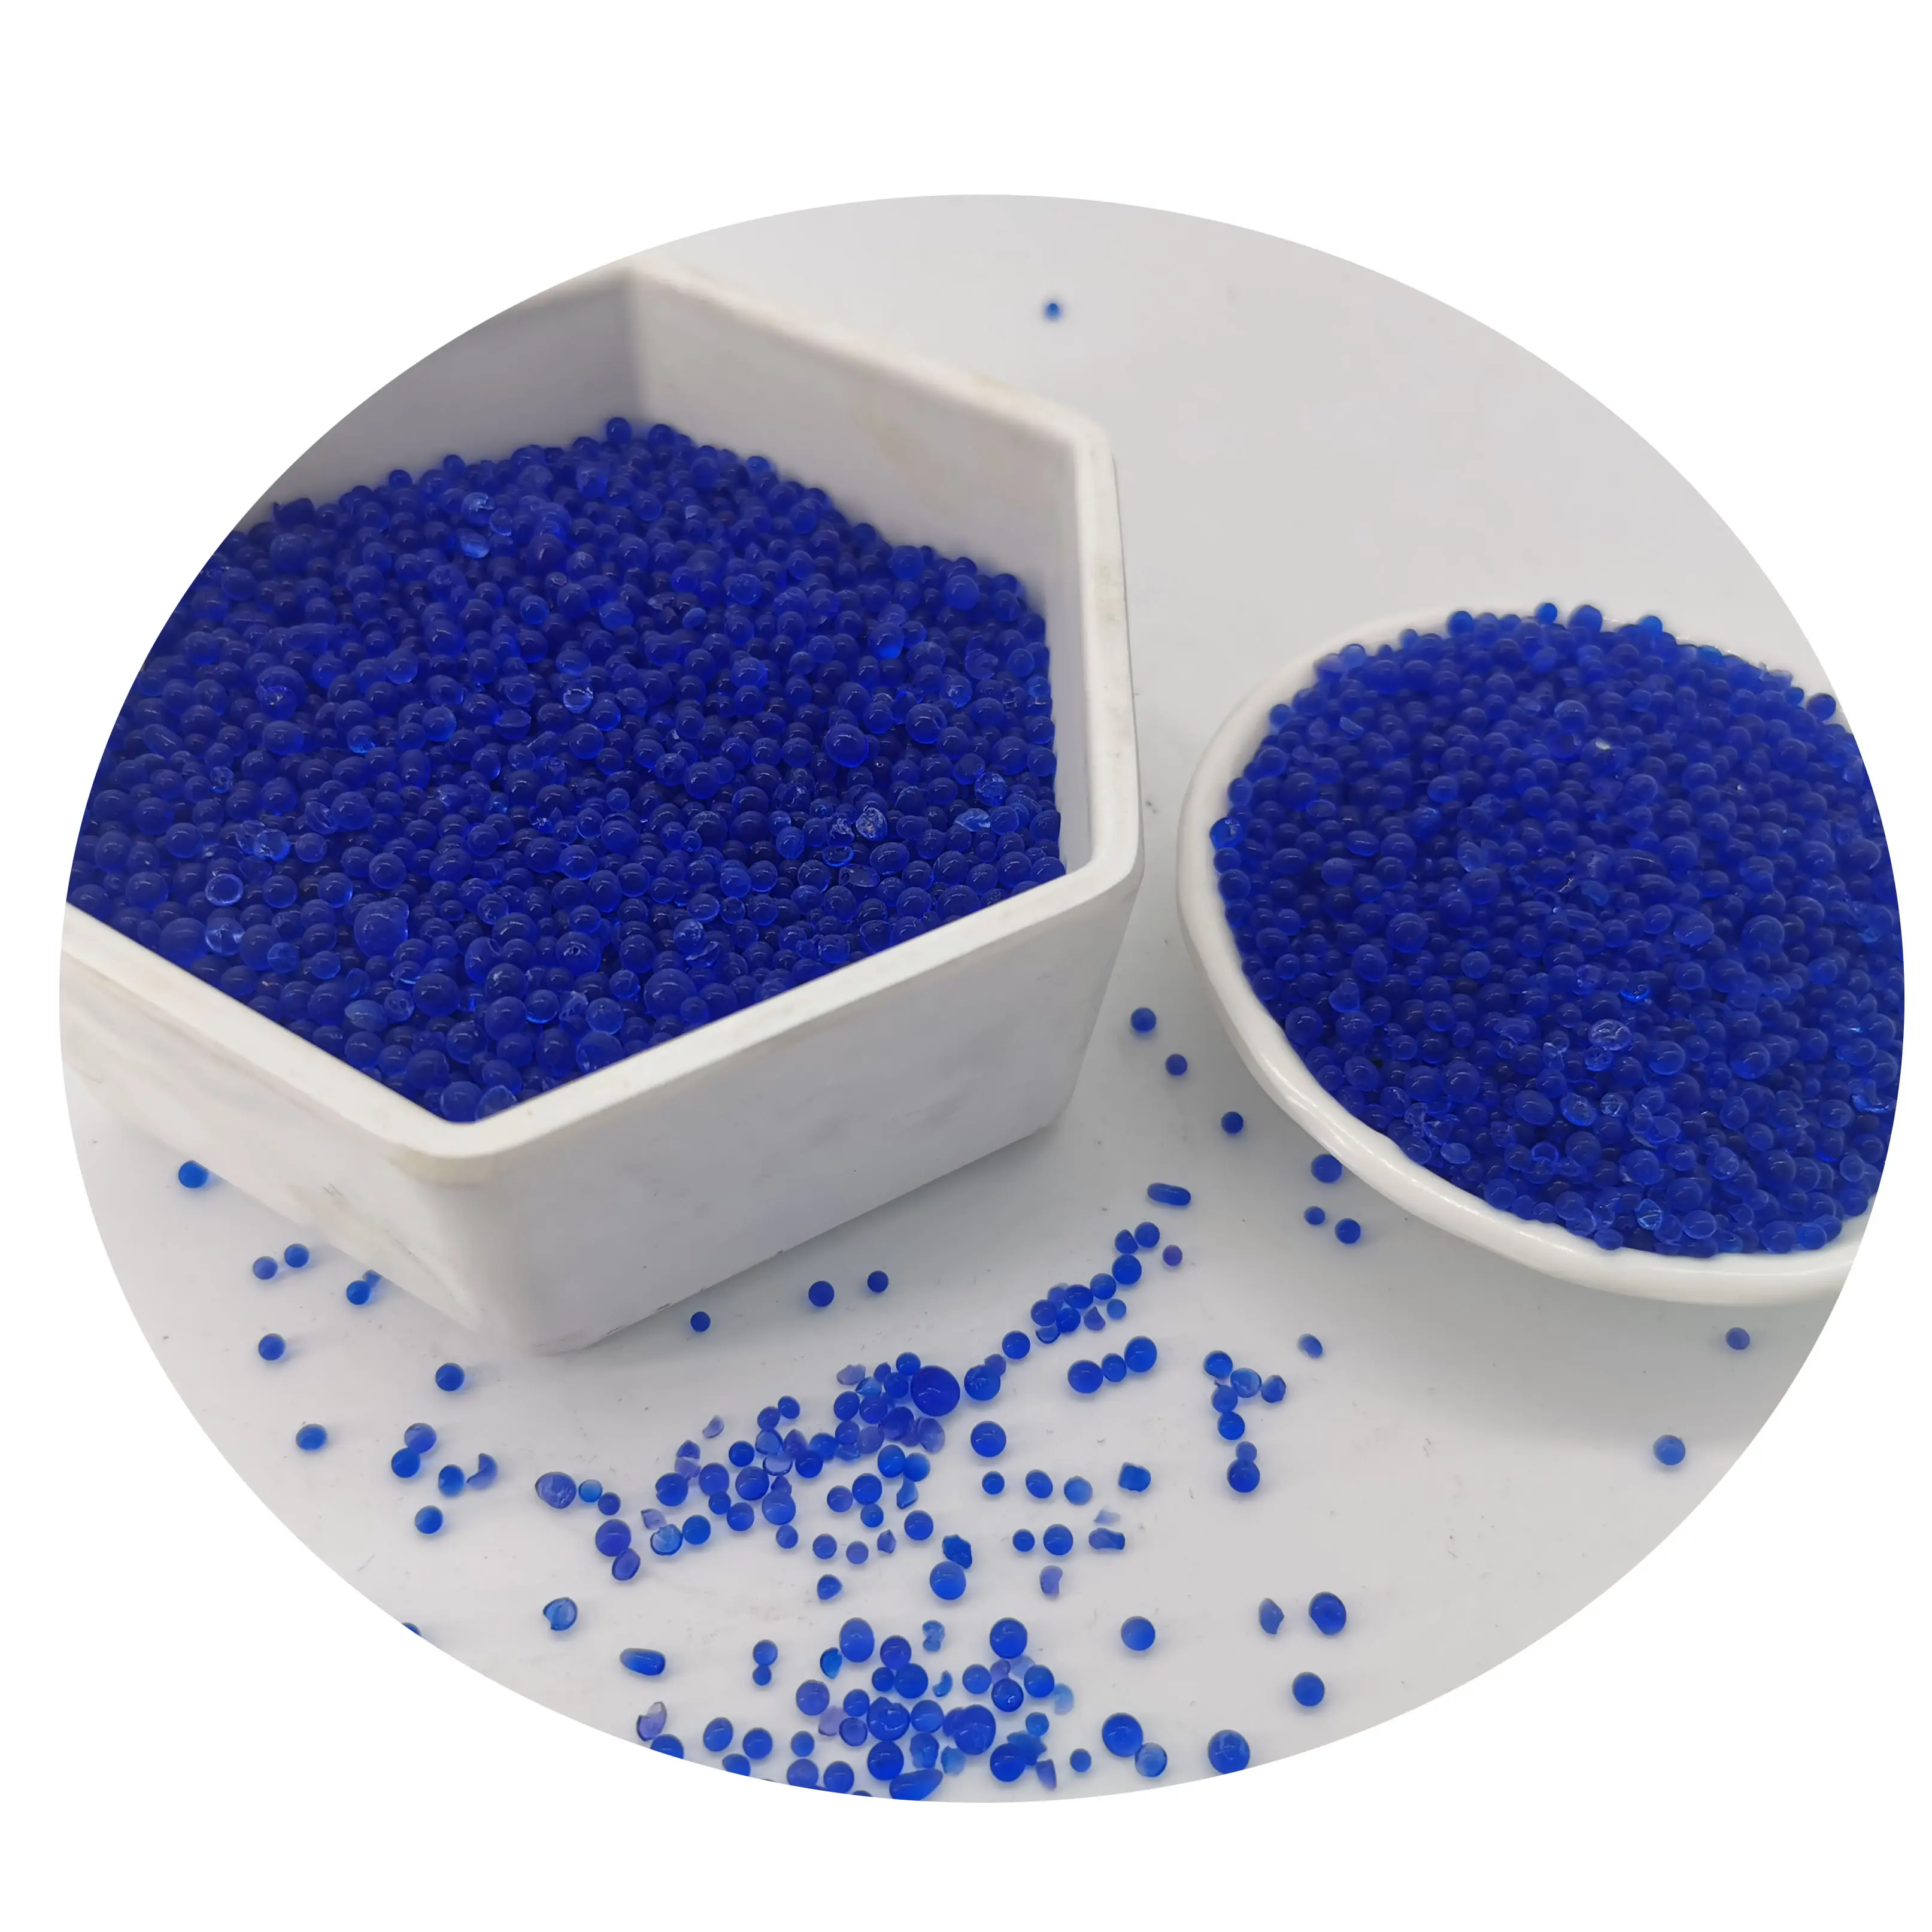 High Adsorption Why Us 50 G Non-Toxic Silica Gel Desiccant Wardrobe Drawer Moisture Absorber Beads